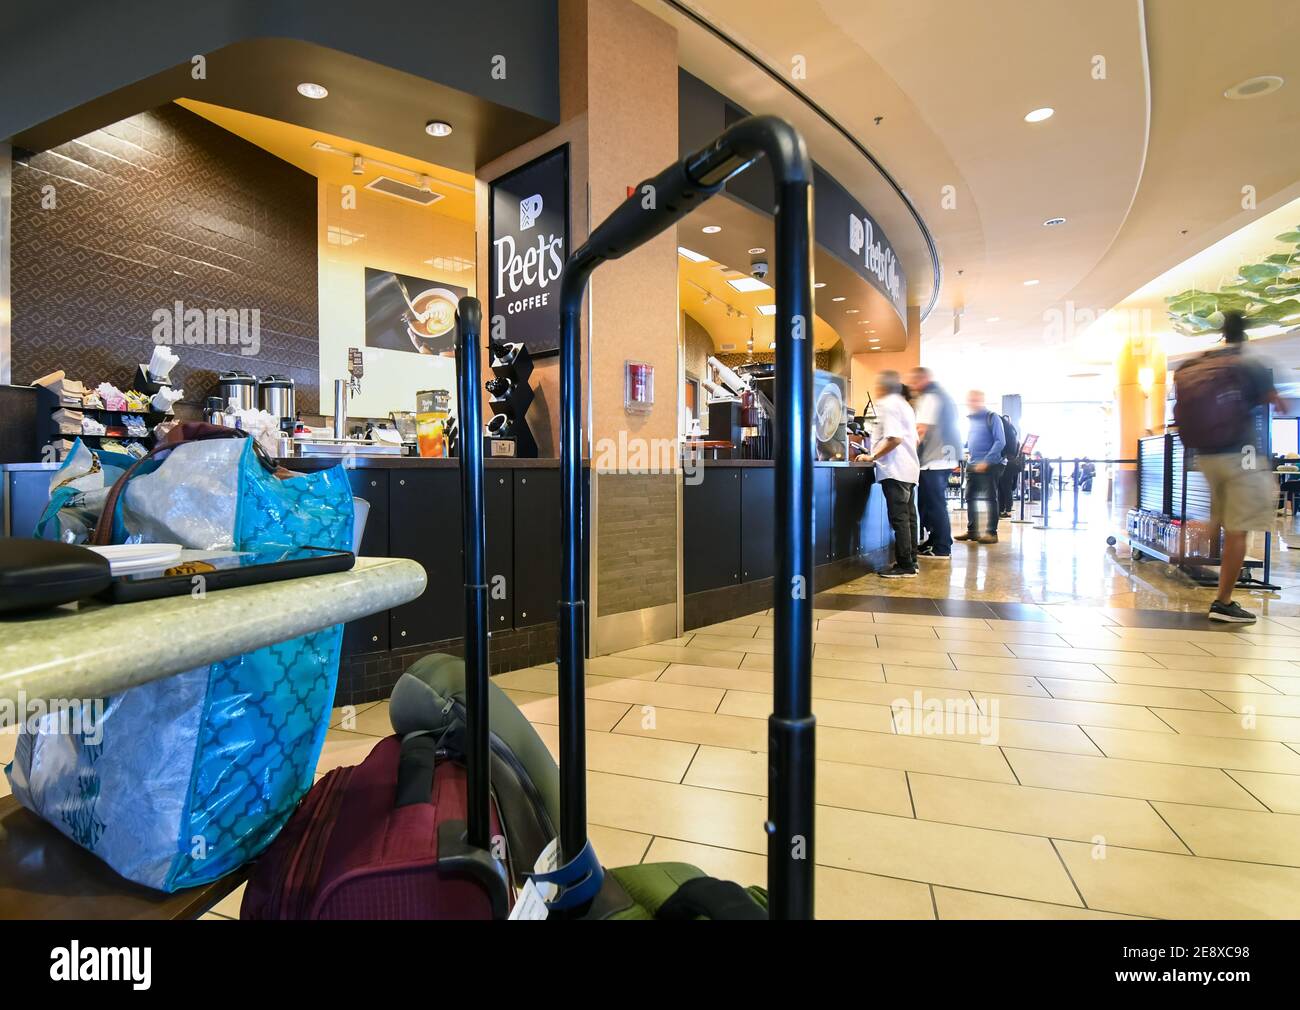 Travelers wait in line at a Peet's Coffee stand shop inside the Seattle Terminal Airport, in Seattle, Washington, USA. Stock Photo